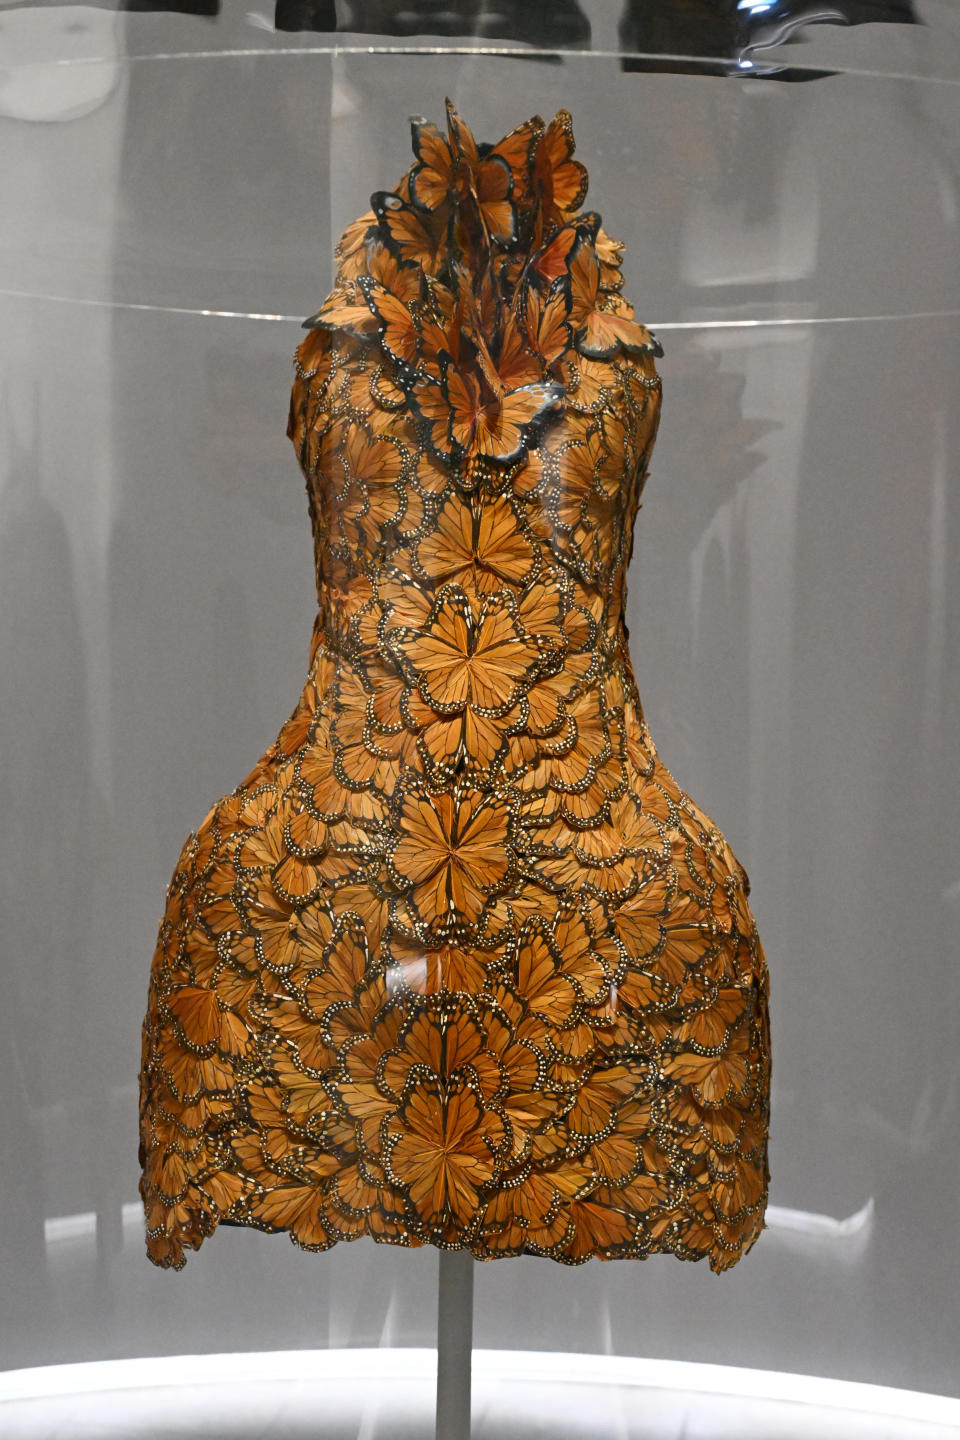 Elegant sleeveless dress on display with intricate butterfly pattern design